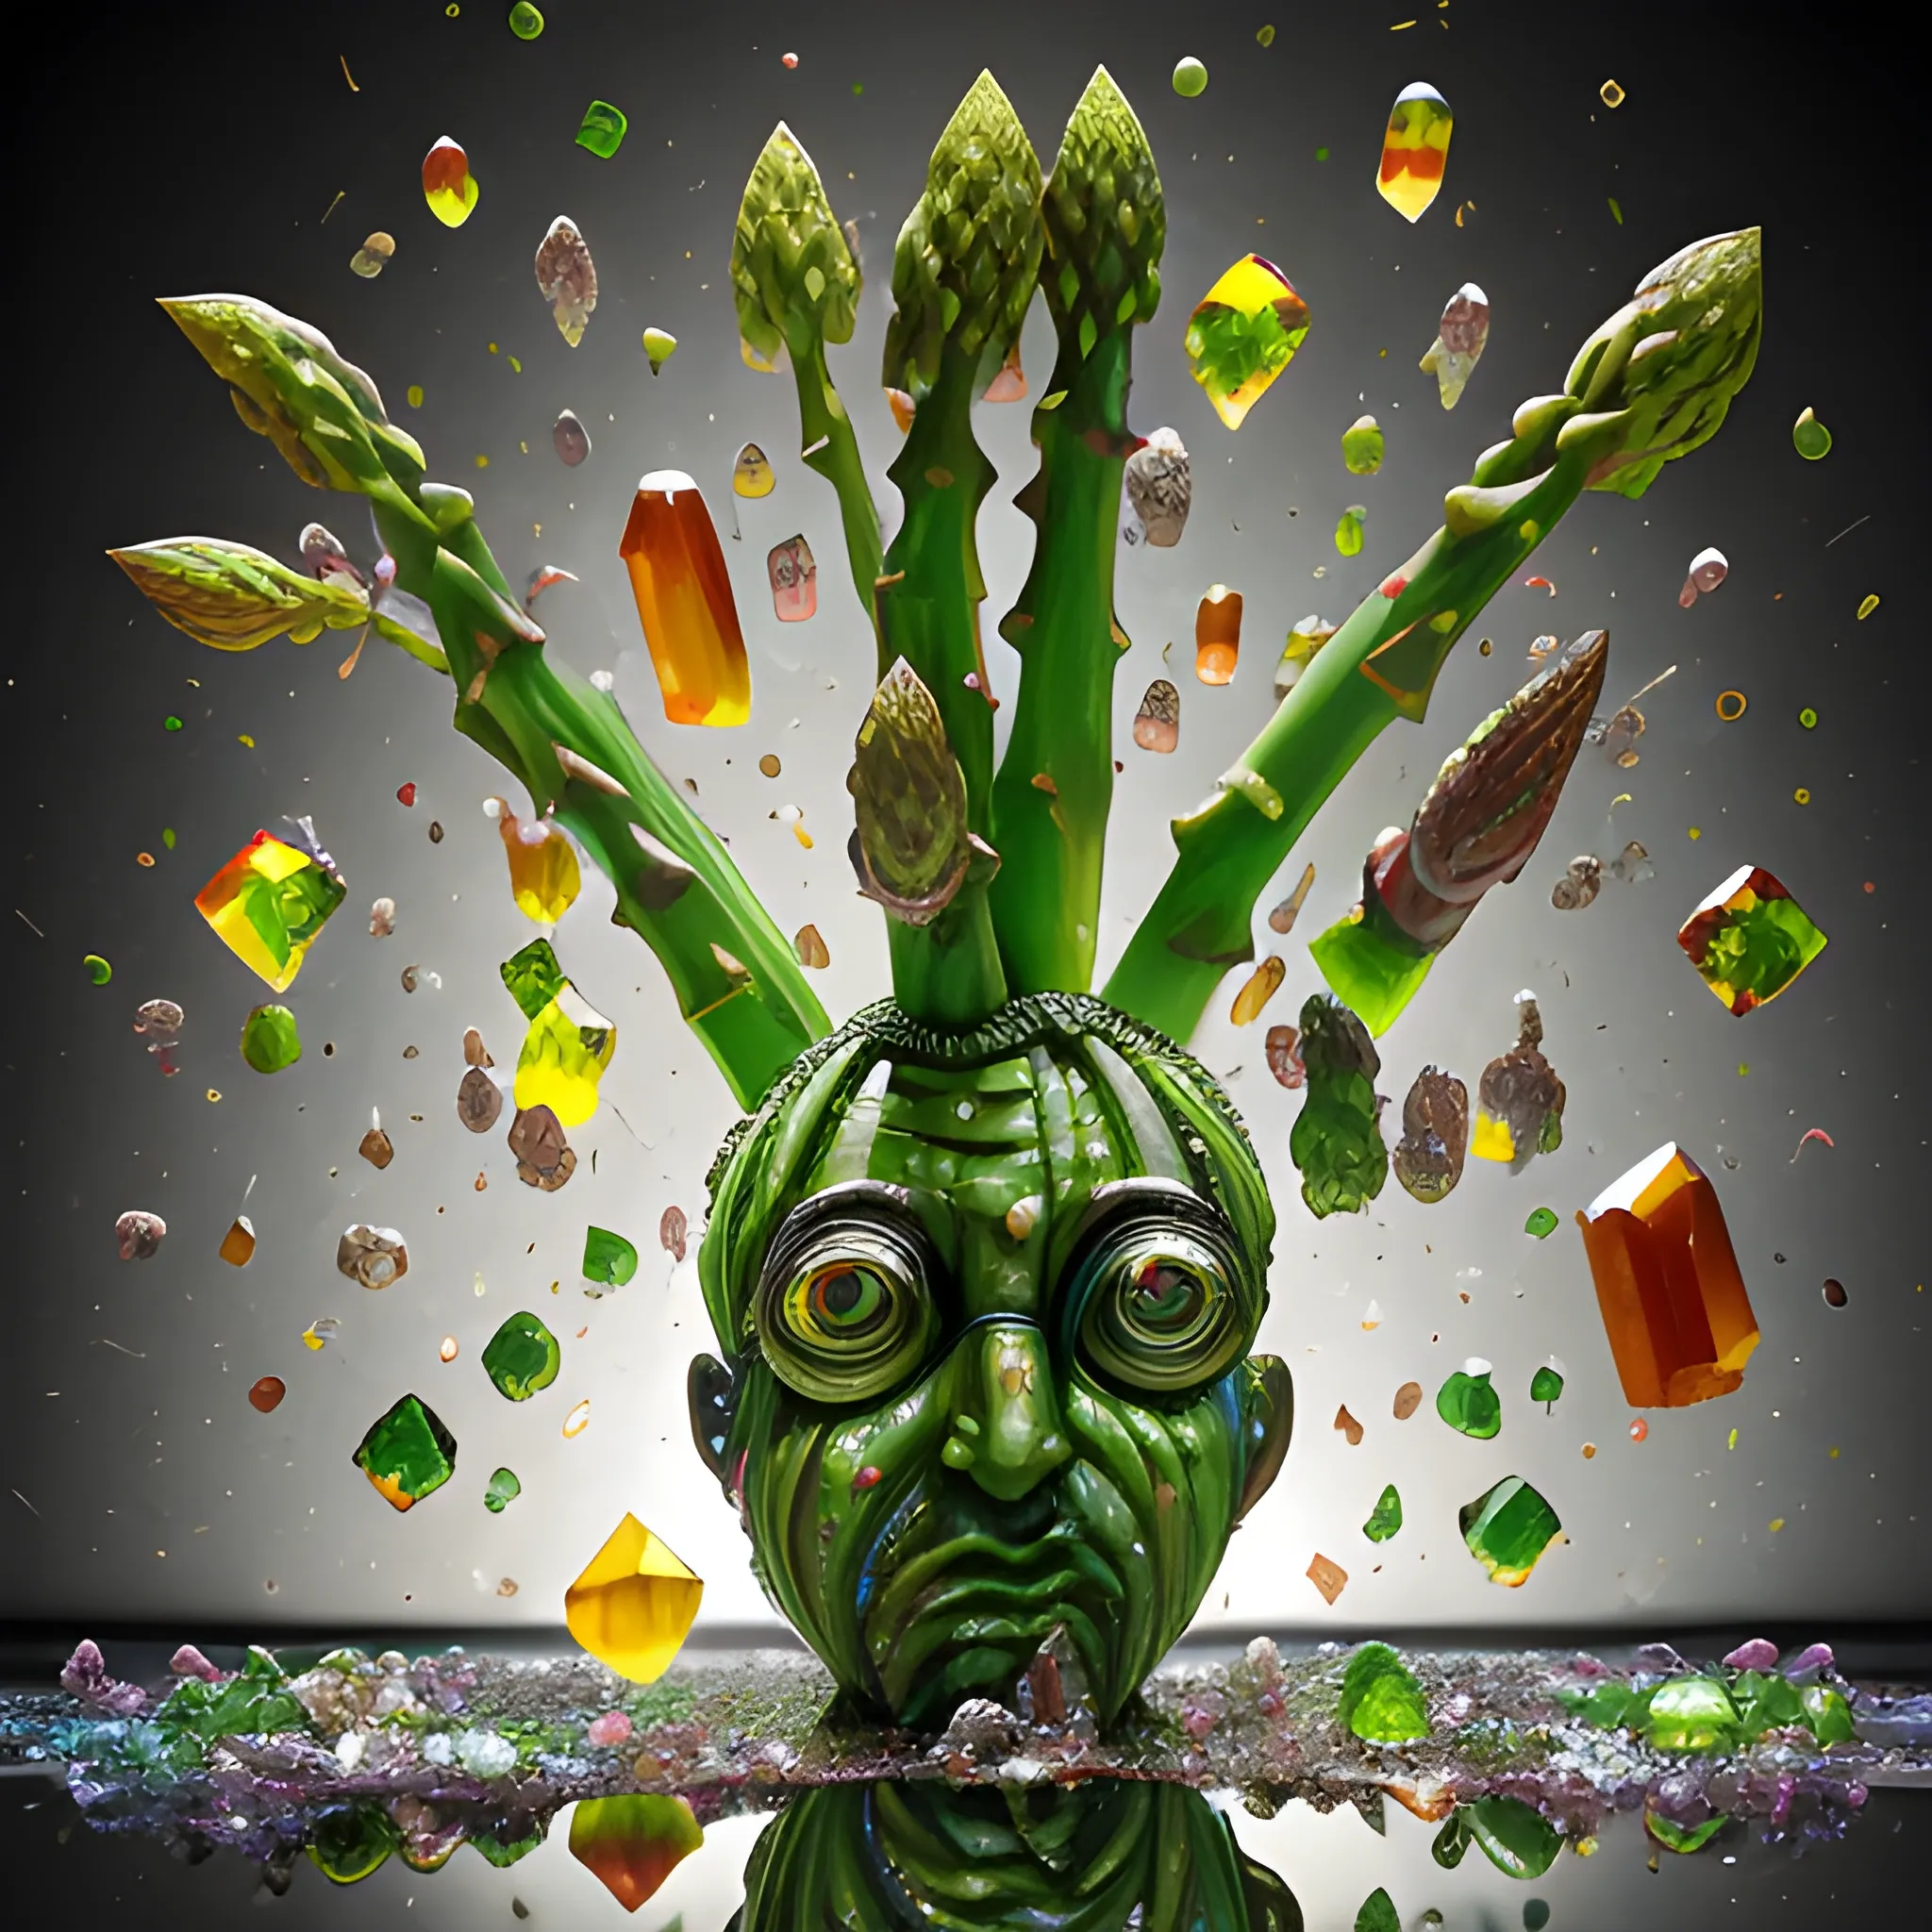 make a sculpture of many crystal crazy asparagus with human face, Brussels sprouts around, many broken glass in the air, saturated colors
surrealism, chaotic background, 3D, Trippy,  eerie atmosphere, close up, Oil Painting, angular perspective 